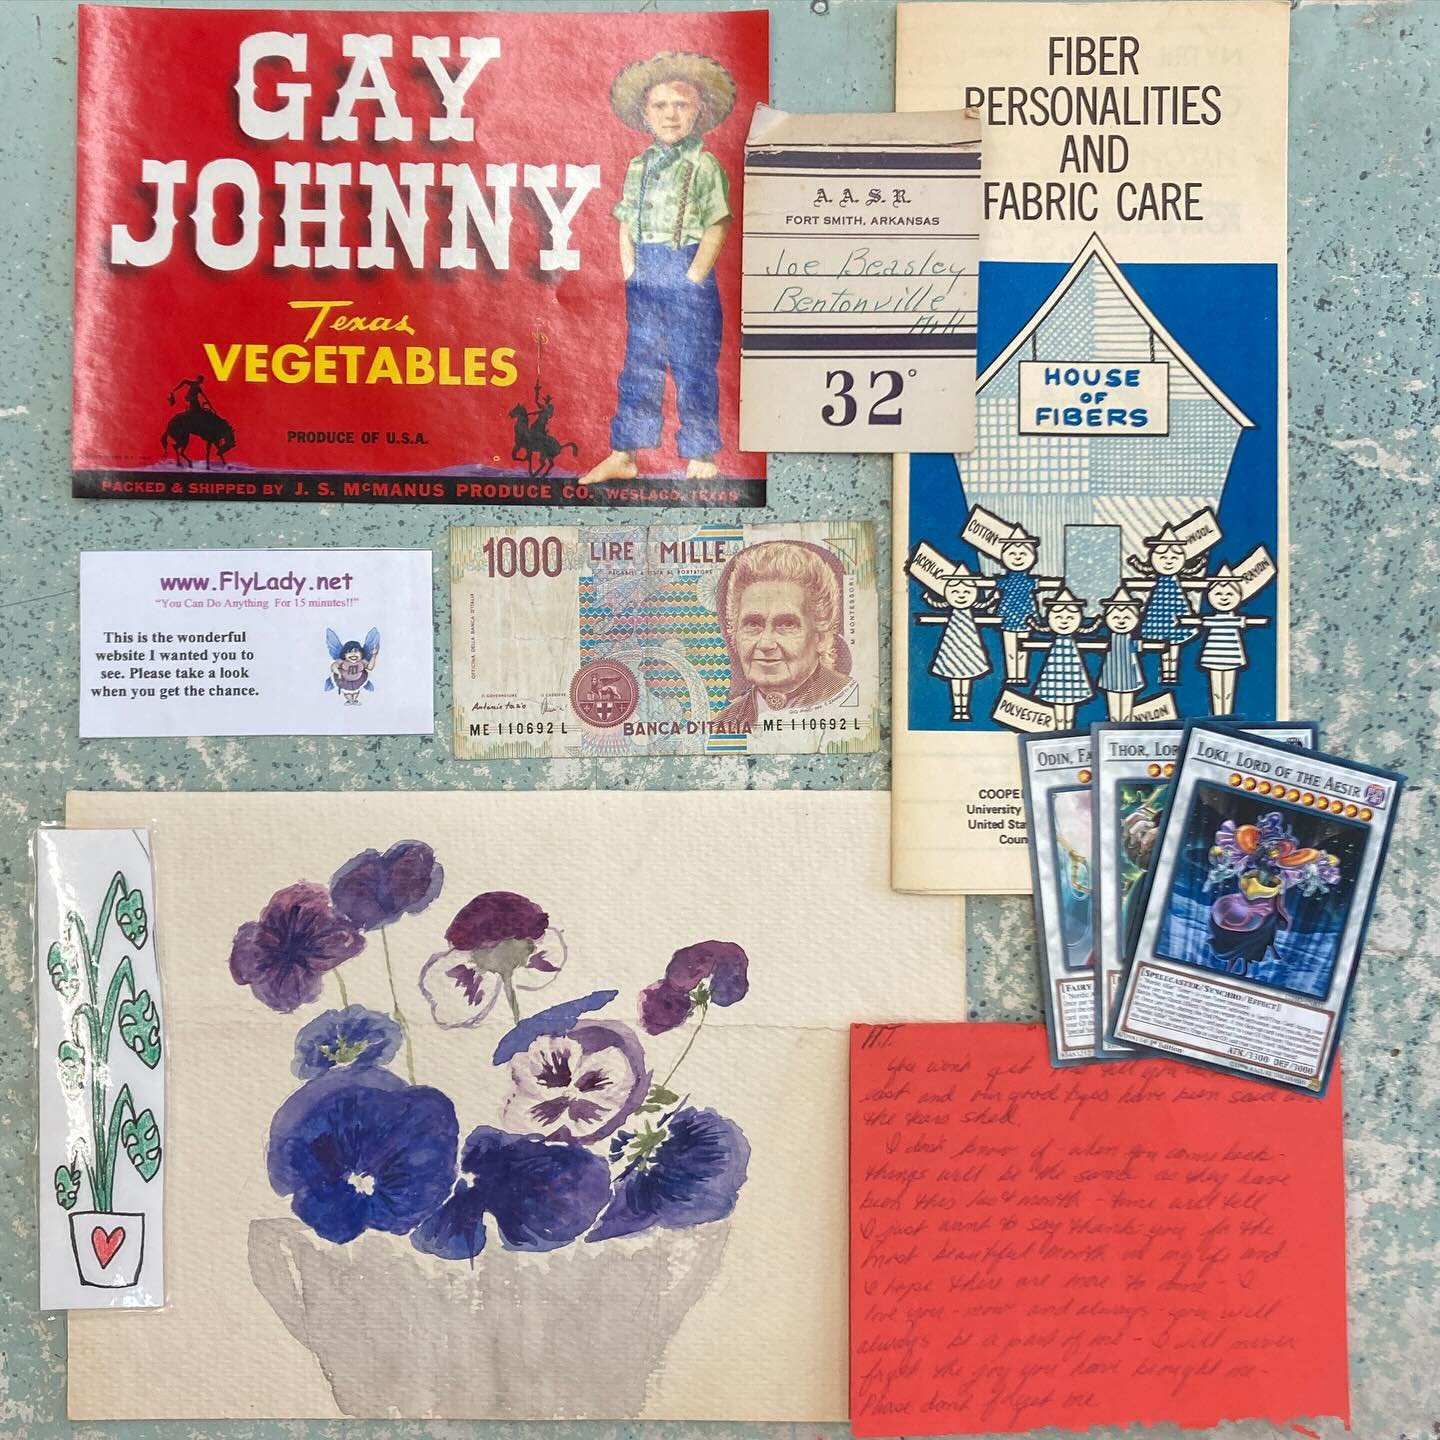 Good day to youns and yourns, here&rsquo;s a bunch of neat stuff we found in books this week:

- Gay Johnny Texas Vegetables, unused 1950s vegetable crate label featuring Gay Johnny and a couple of rootin&rsquo; tootin&rsquo; cowboys

- Potted plant 